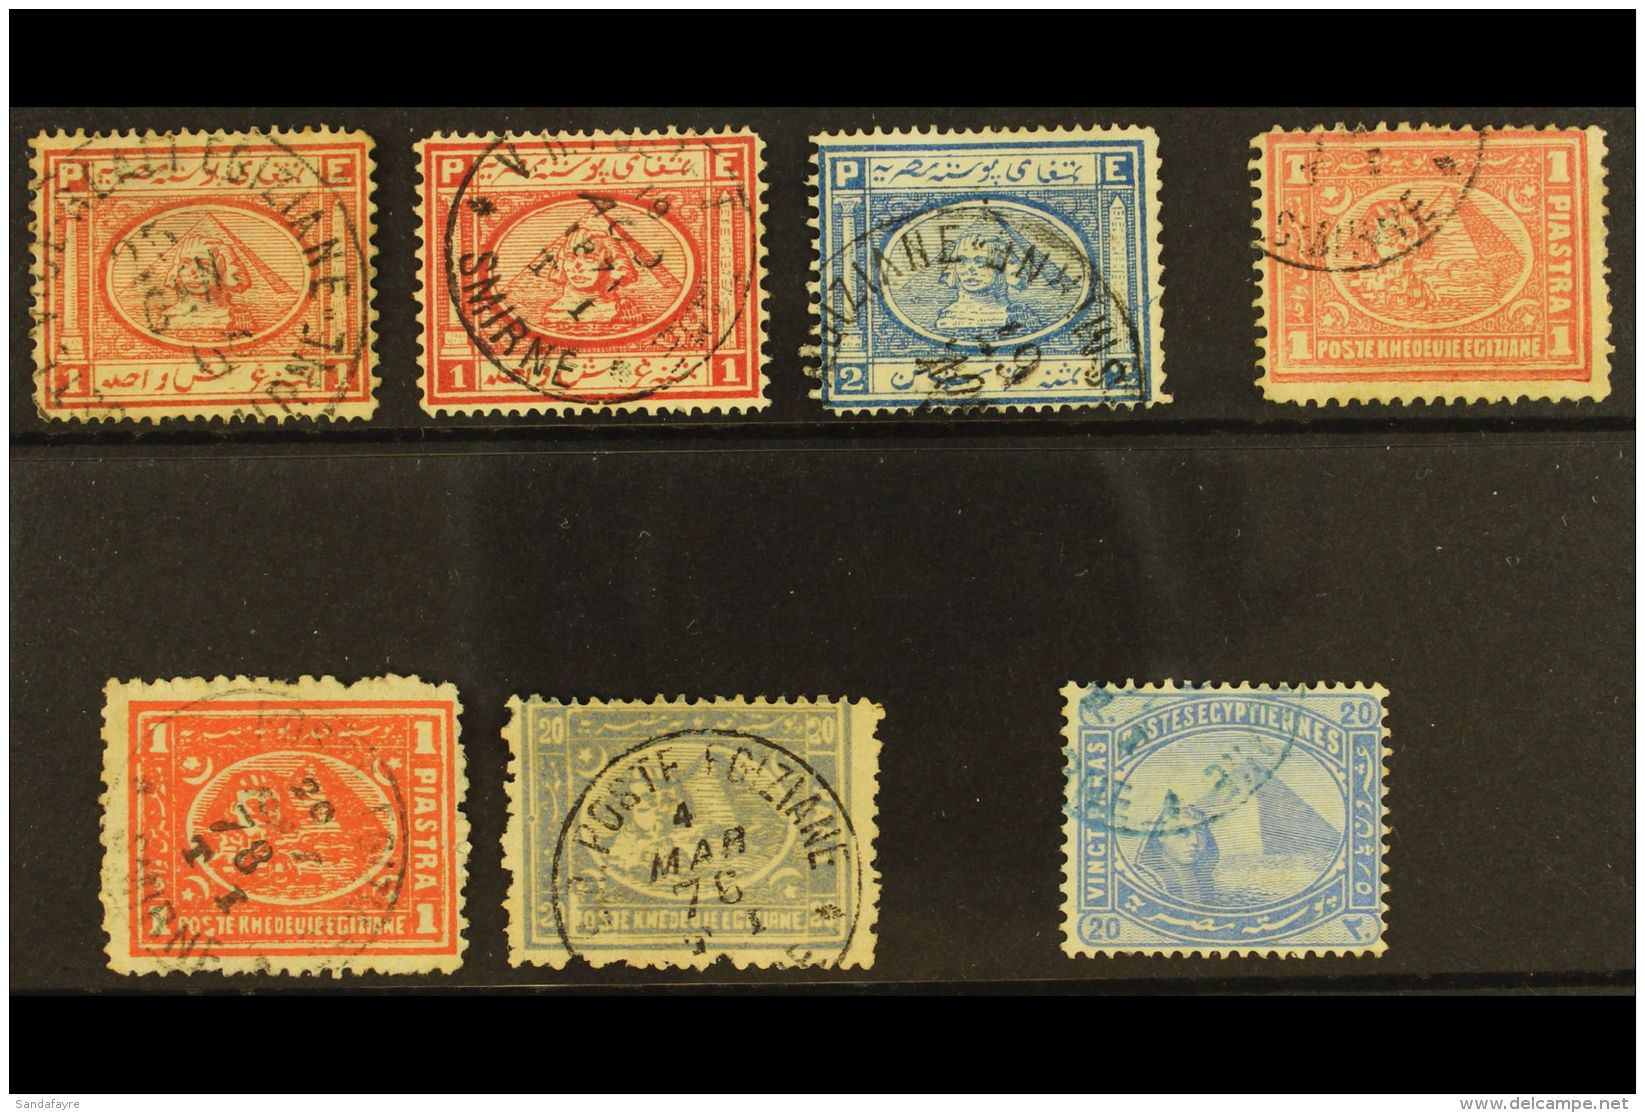 USED AT SMIRNA (TURKEY)  1867 - 1879 Selection Of Pyramid Stamps Cancelled At The Egyptian PO At Smirna. Scarce... - 1866-1914 Khedivate Of Egypt